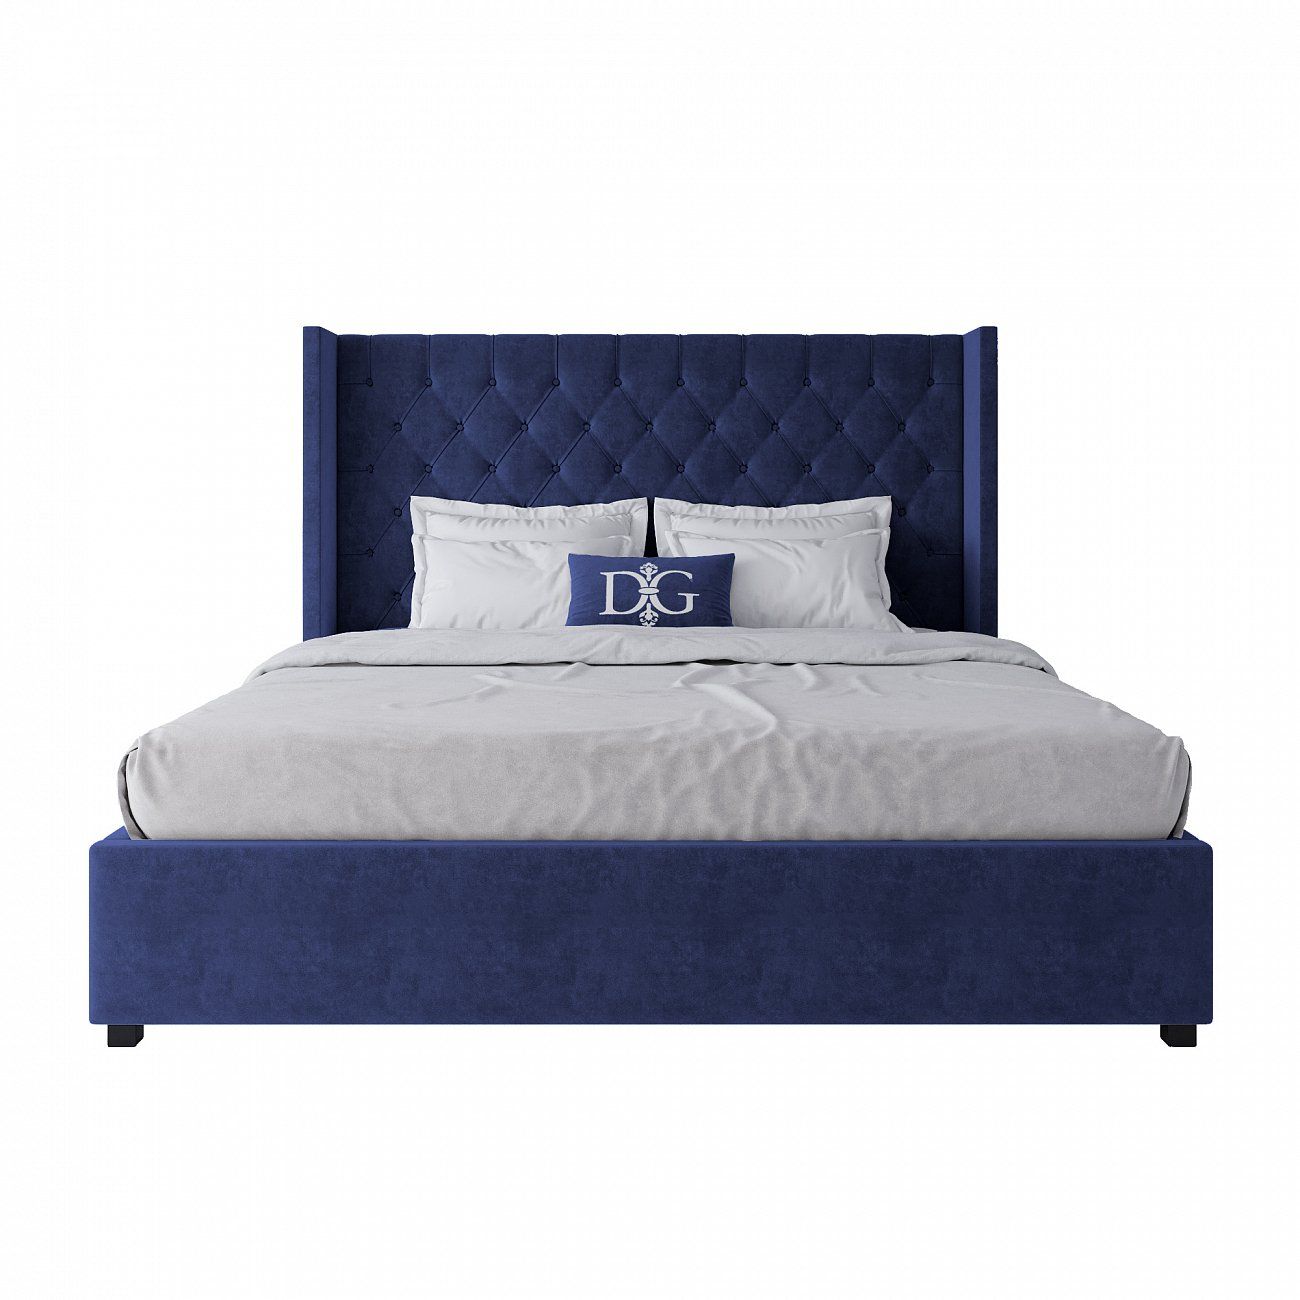 Double bed with upholstered headboard 180x200 cm dark blue Wing-2